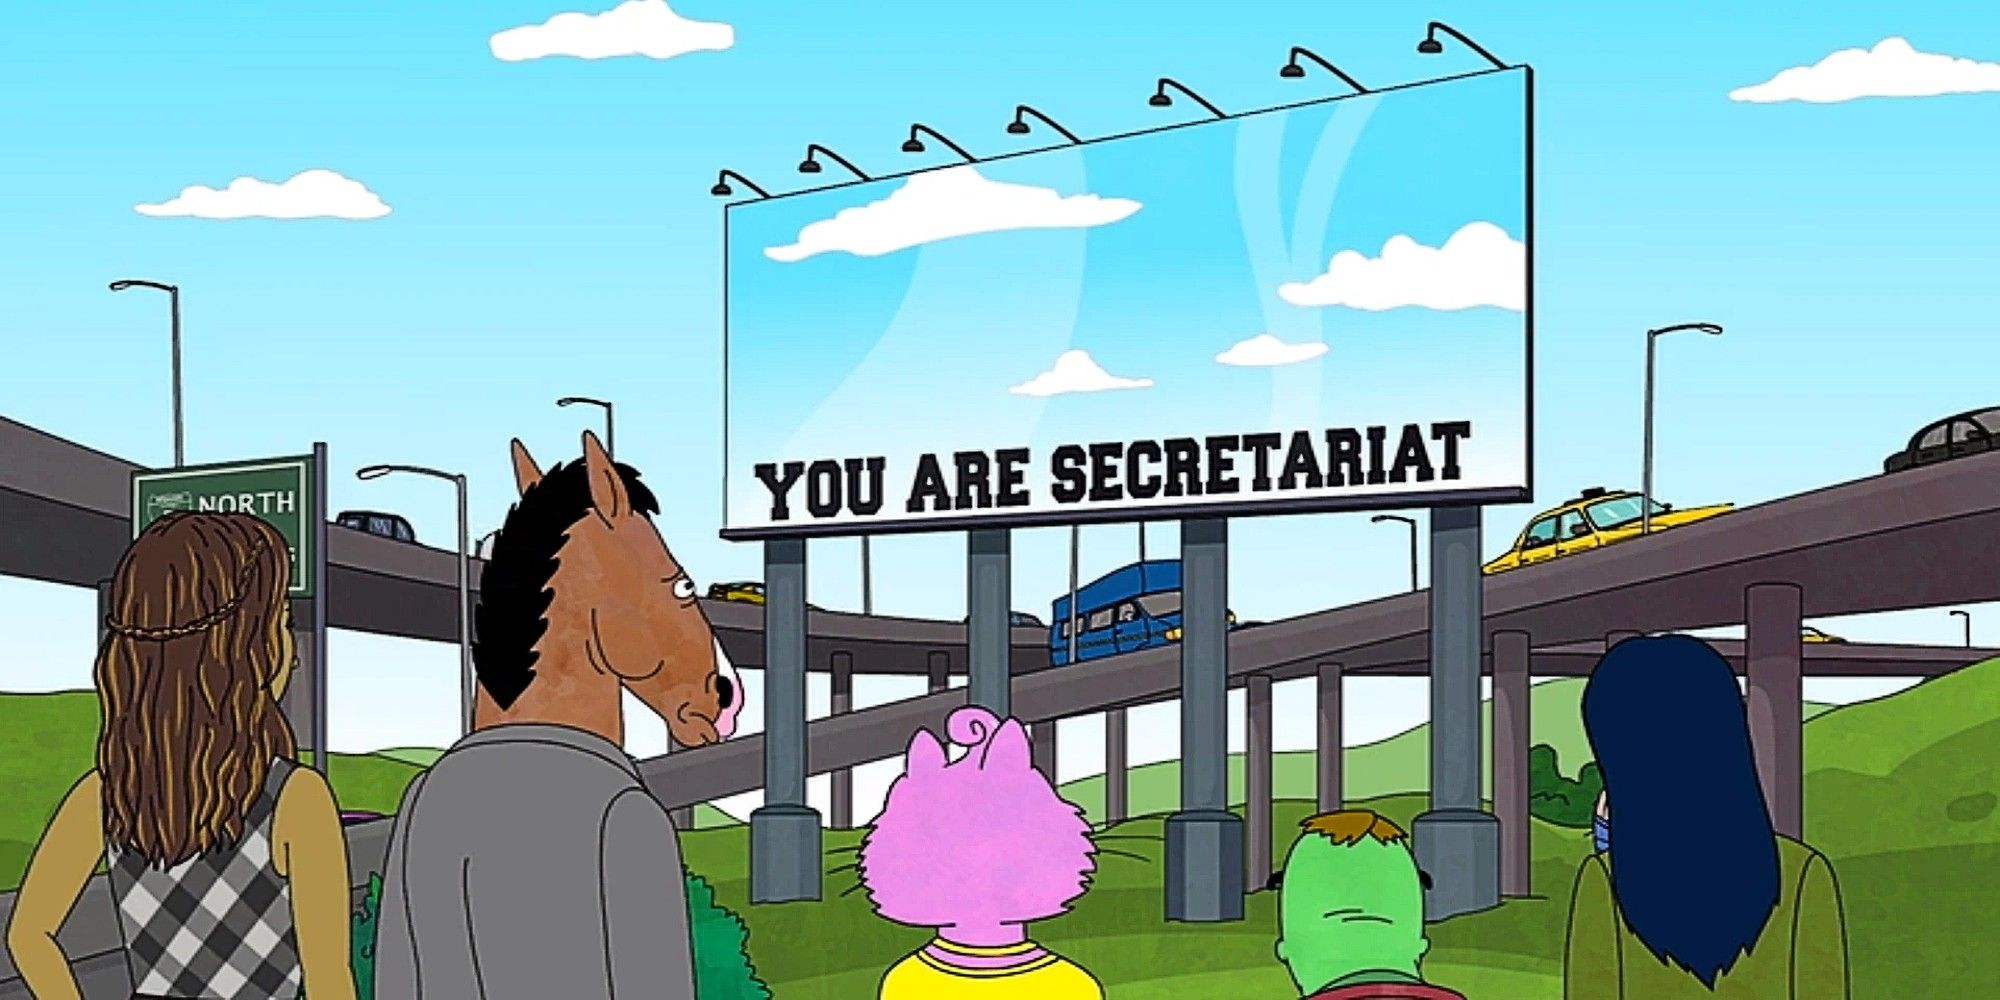 Ana, Bojack, Princess Carolyn, Lenny, and Diane's backs, as they stand facing a giant mirror bulletin board that reads "YOU ARE SECRETARIAT" on Bojack Horseman